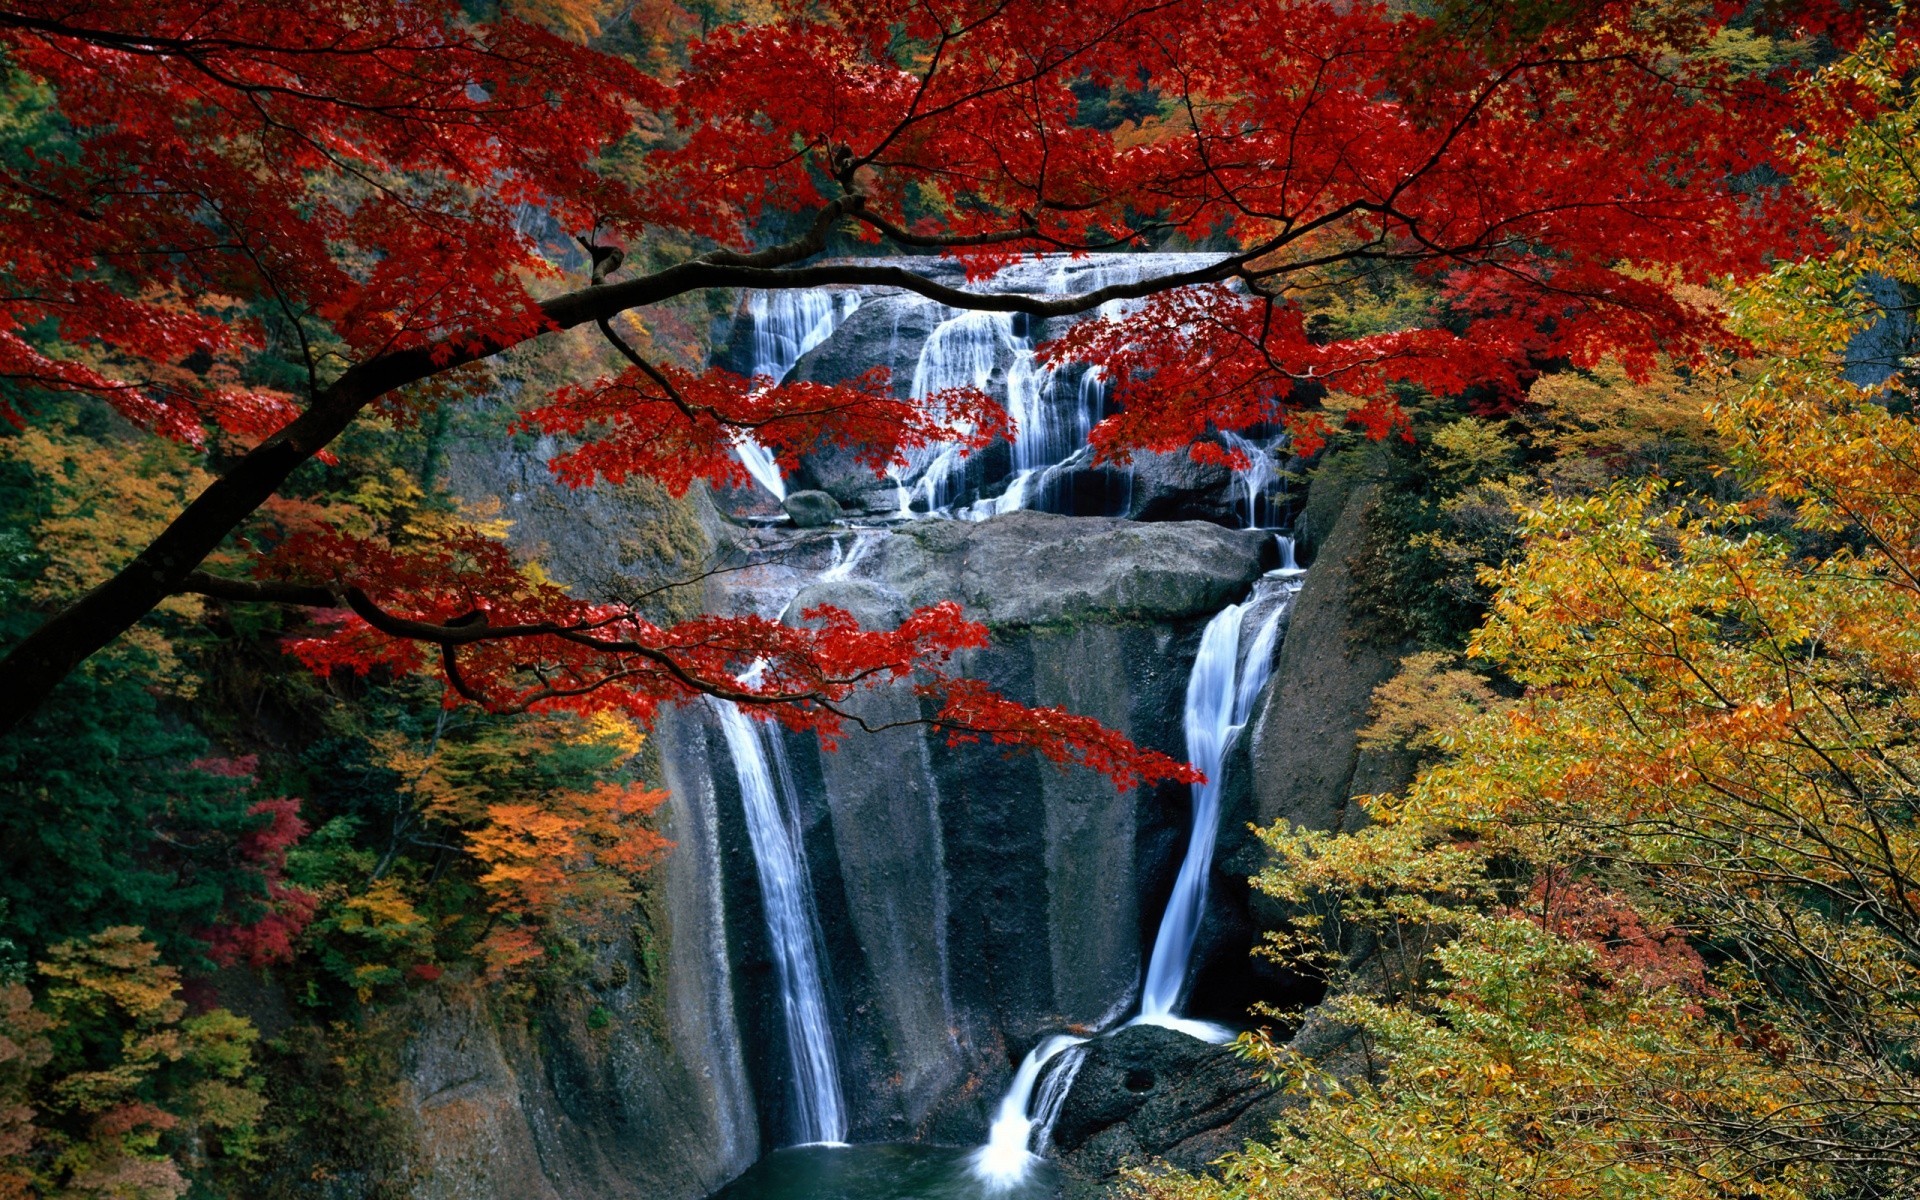 waterfalls fall leaf wood maple tree landscape nature outdoors park scenic stream season river water lush environment scenery